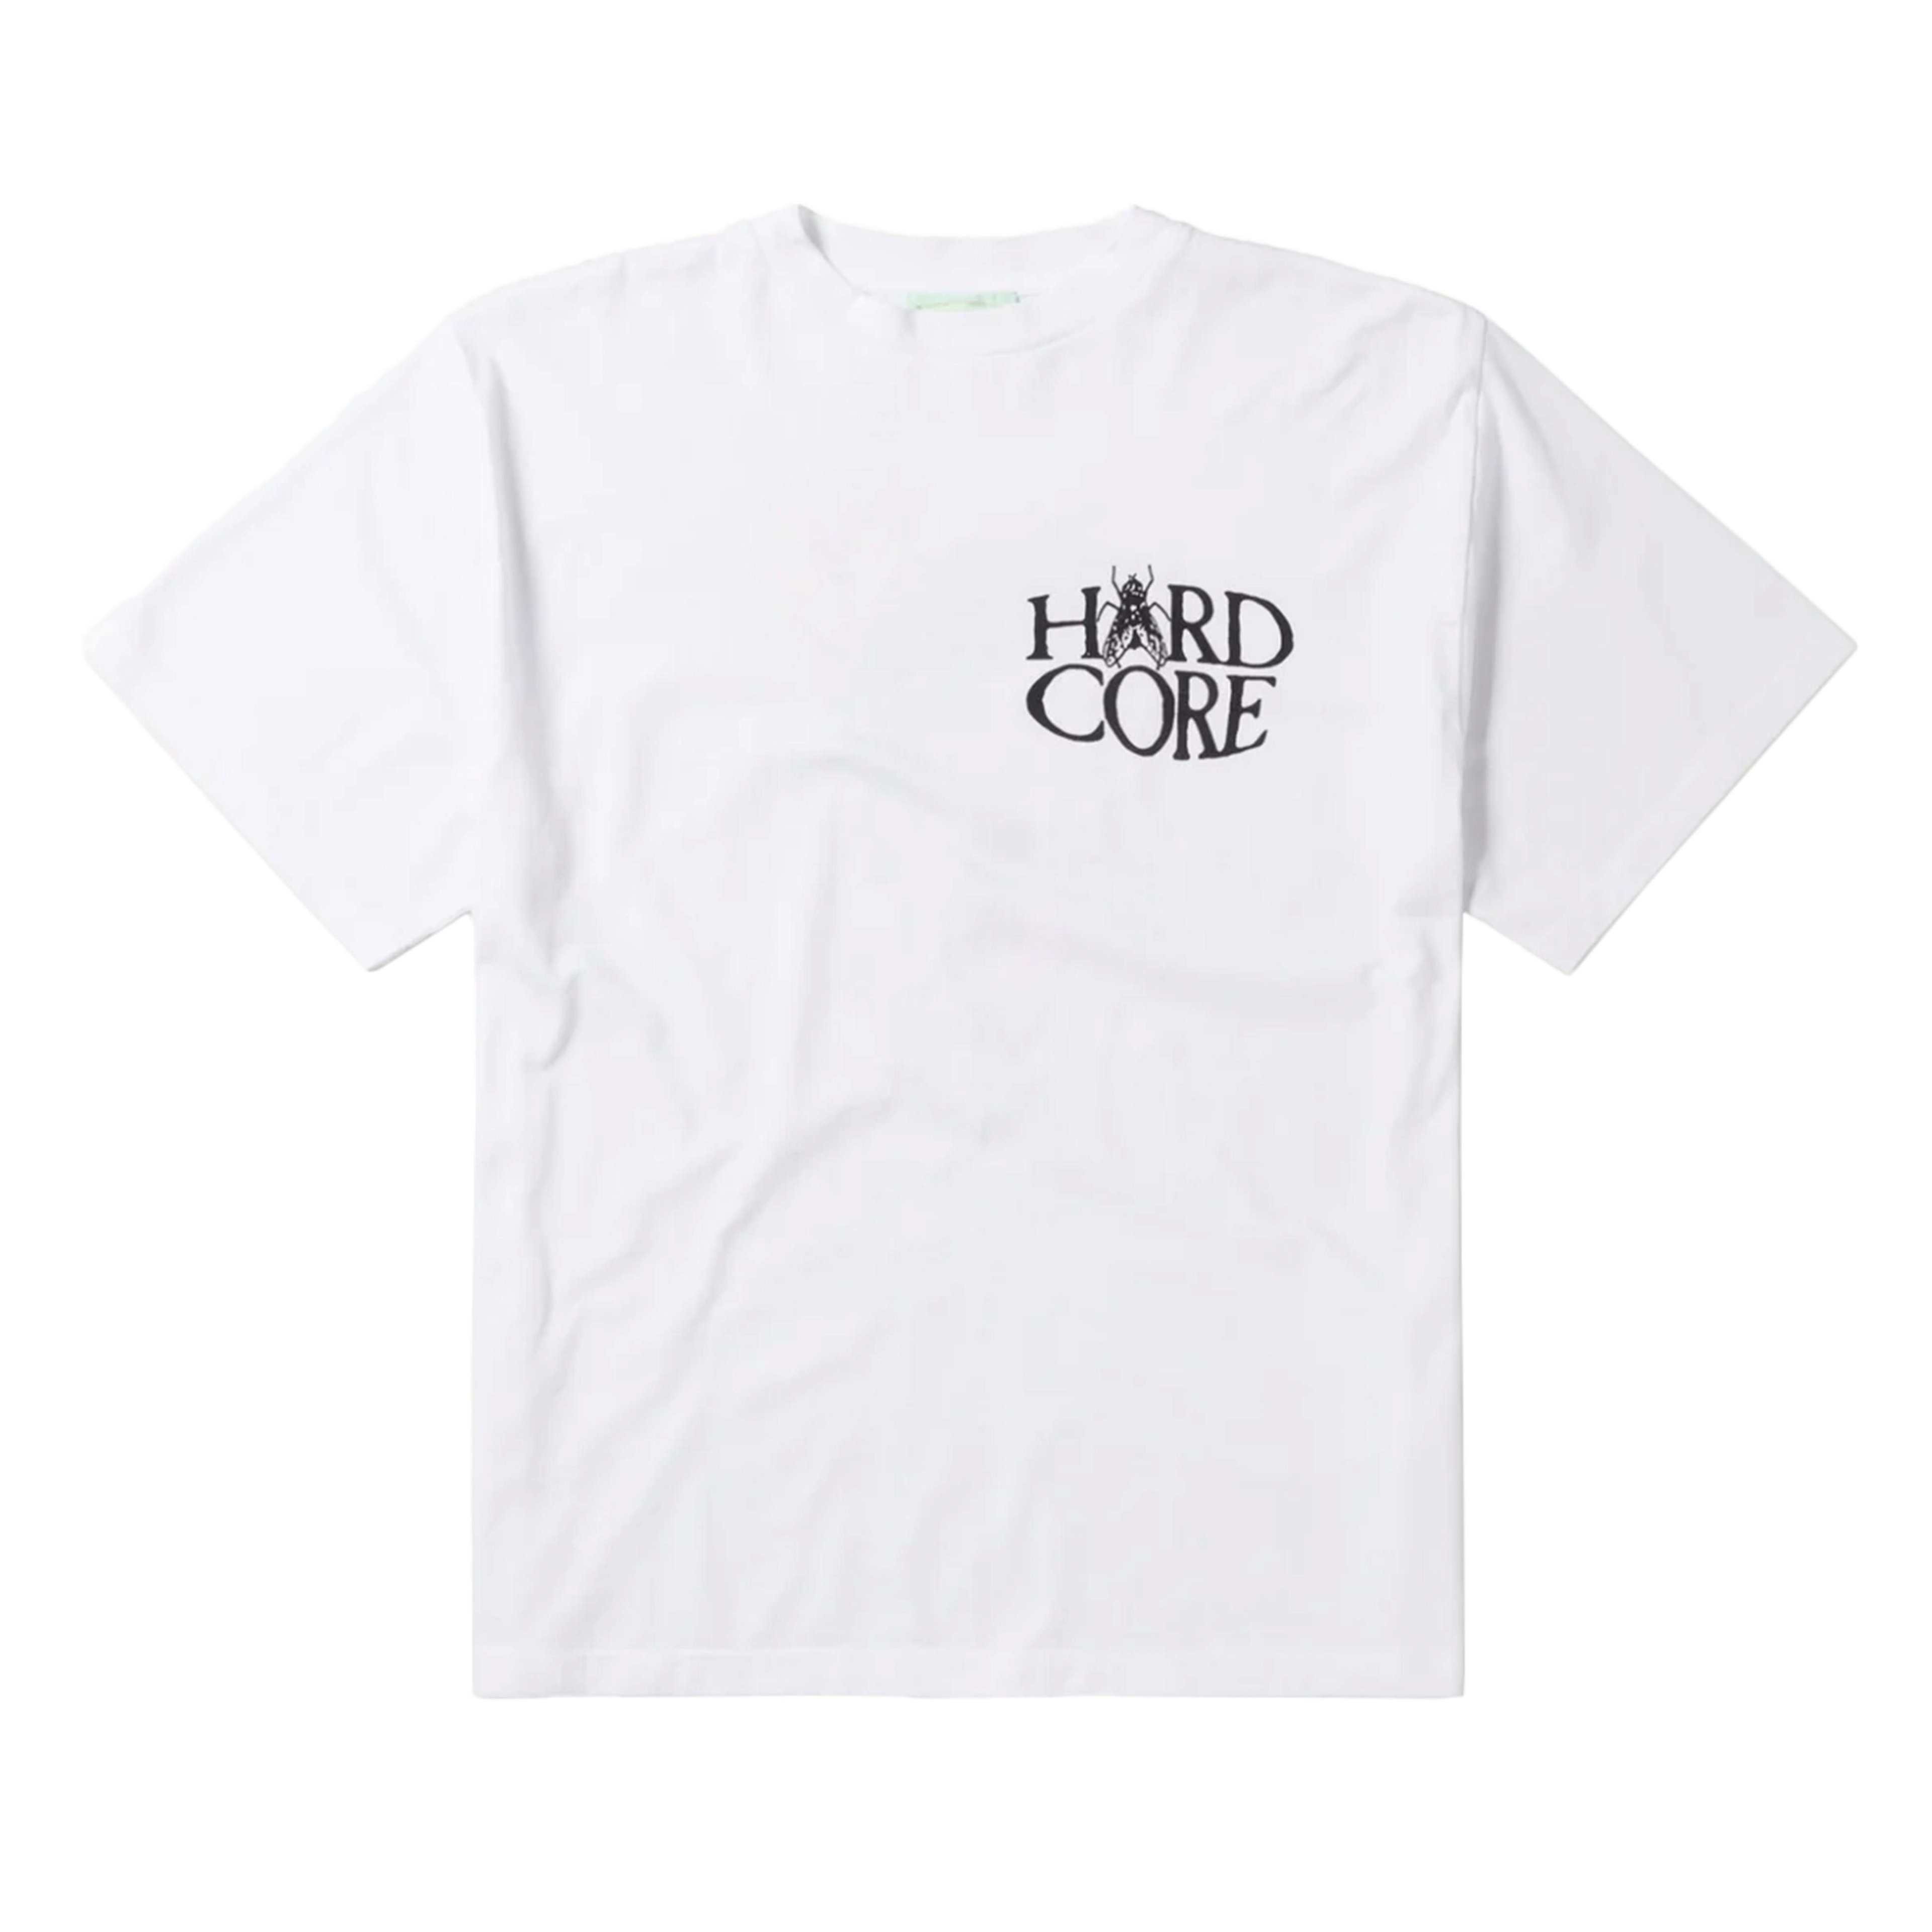 ARIES - Cave They SS Tee - (White) by ARIES